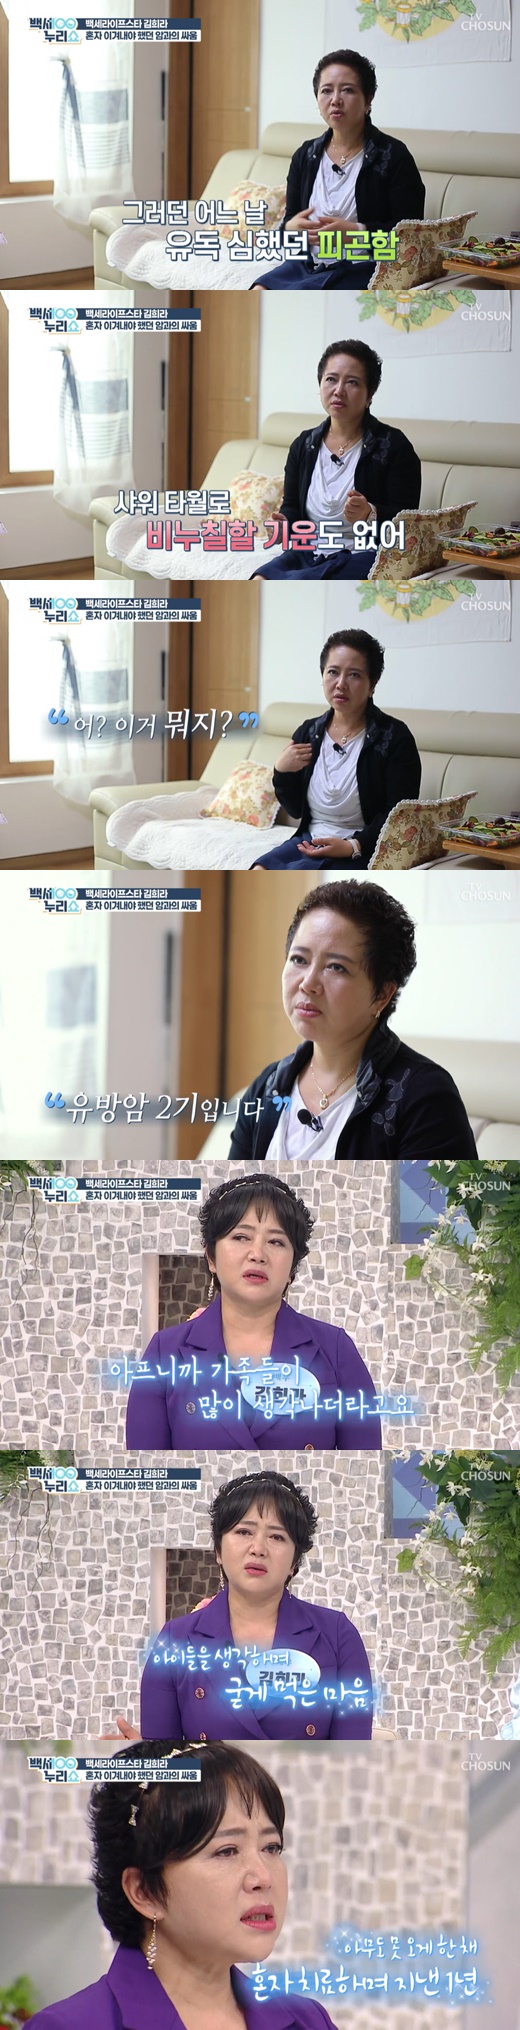 Actor Kim Hee-ra has Confessions about fighting cancer with Divorce.Kim Hee-ra appeared as a guest on the comprehensive channel TV drama Baekse Nuri Show broadcast on the last 7 days.Kim Hee-ras house, which was unveiled on the day, attracted attention because of the wig. Kim Hee-ra said, When I was sick, it was a hairy hair.I was surprised to hear that the question When is it? I was surprised by the cast members by saying It was a year ago.Kim Hee-ra said, I was very depressed after my hair was gone, and I thought I was not me, so I bought a wig to comfort me.In addition, Kim Hee-ra said, I think Im talking about it for the first time on the air, I split up with my baby dad around 2008.Now I say Dolsing and Divorce, and then I swear to all the people who have been divorced.I did not have to say it, so I was not talking. Kim Hee-ra said: Agnaldo Timóteo was very tired: if he had showered with a shower towel, he would have found it later.I had no energy to shower with Agnaldo Timóteo shower towels, so I was soaping with my bare hands and I touched it in my hand. I went to obstetrics and gynecology the next day and said I had a bad prognosis.He diagnosed it as a second stage of breast cancer, he said. (I dont have a family) was very difficult, because people were sick, so I thought of my family.Others are stupid when husbands and family come, but its very hard to overcome Alone. My son came to see me a lot and overlapped with Corona.I saw that my child was next to me because I was sick, so I could not see the hardship of being a mother. I have been here for a year and have been treated for Alone for no one else in the room again, he said. I think I have been treated well.